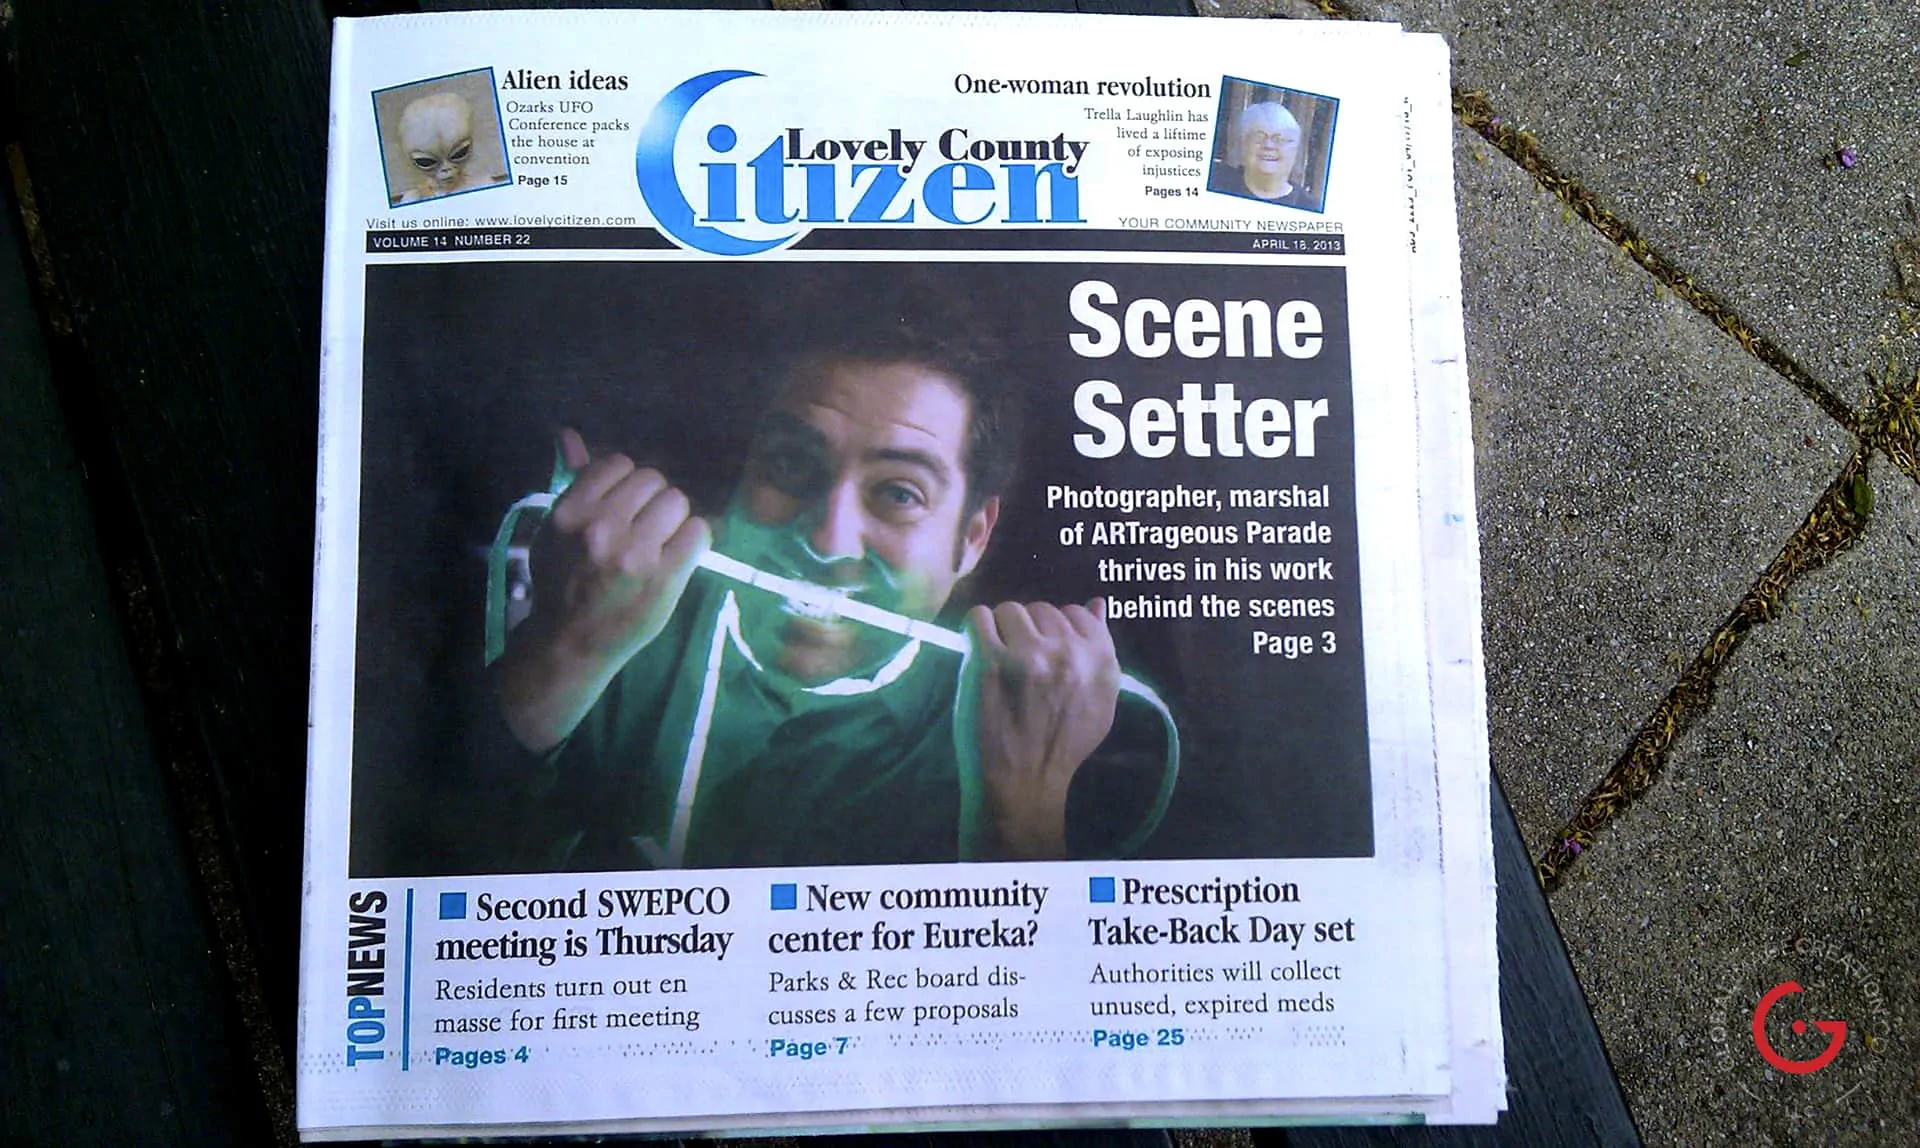 Jeremy Mason McGraw on the Cover of the Citizen